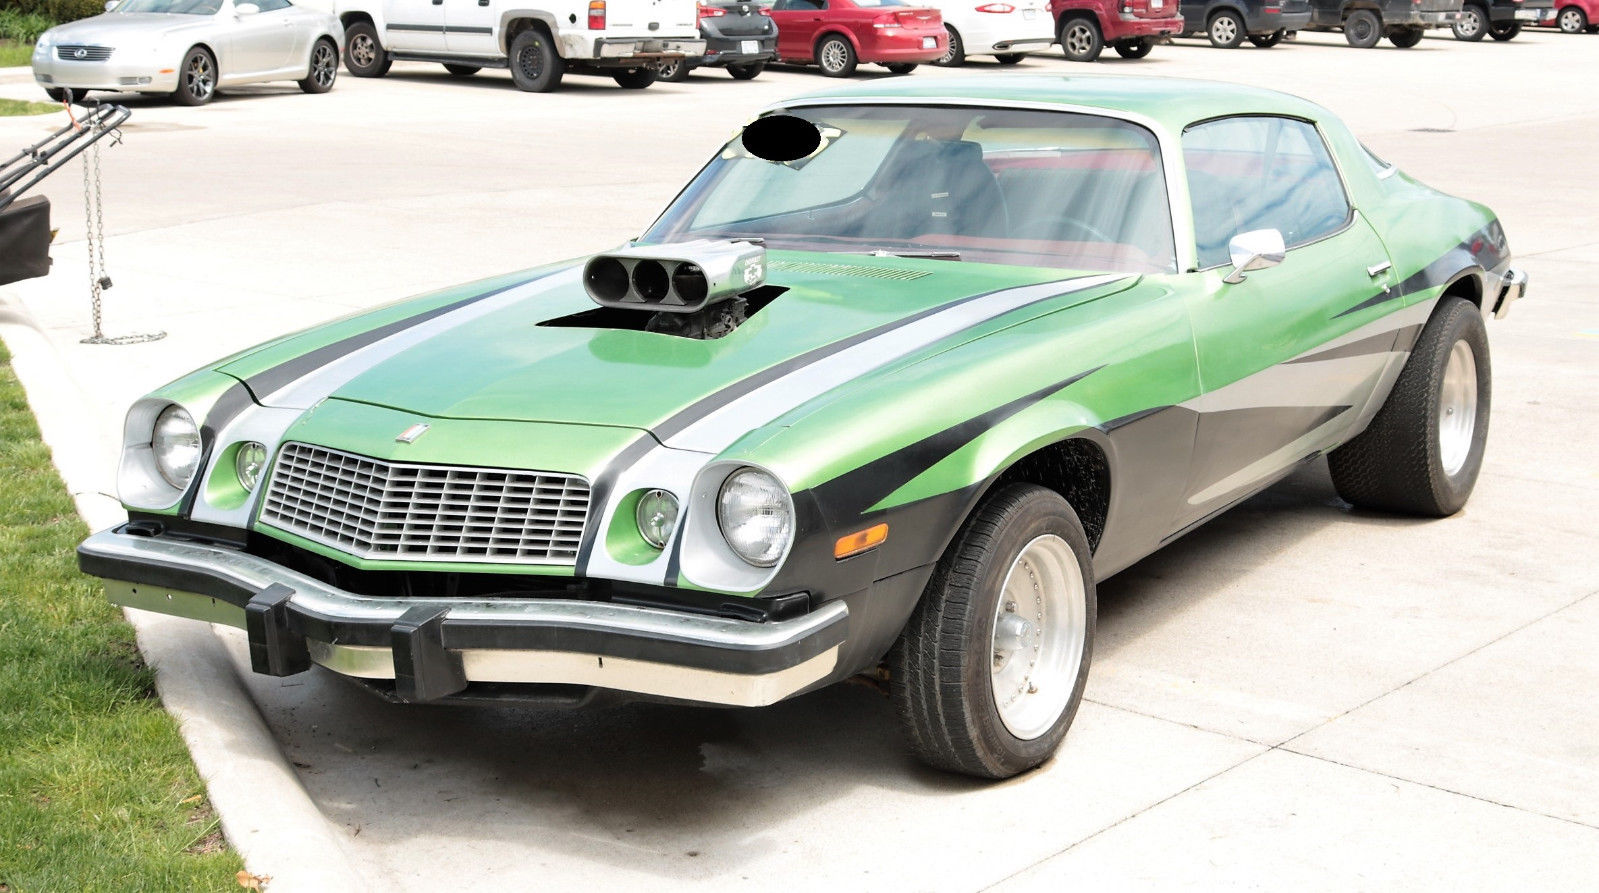  If Cars Could Talk, This 1976 Chevrolet Camaro Would Be  Telling All Sorts Of Stories! 